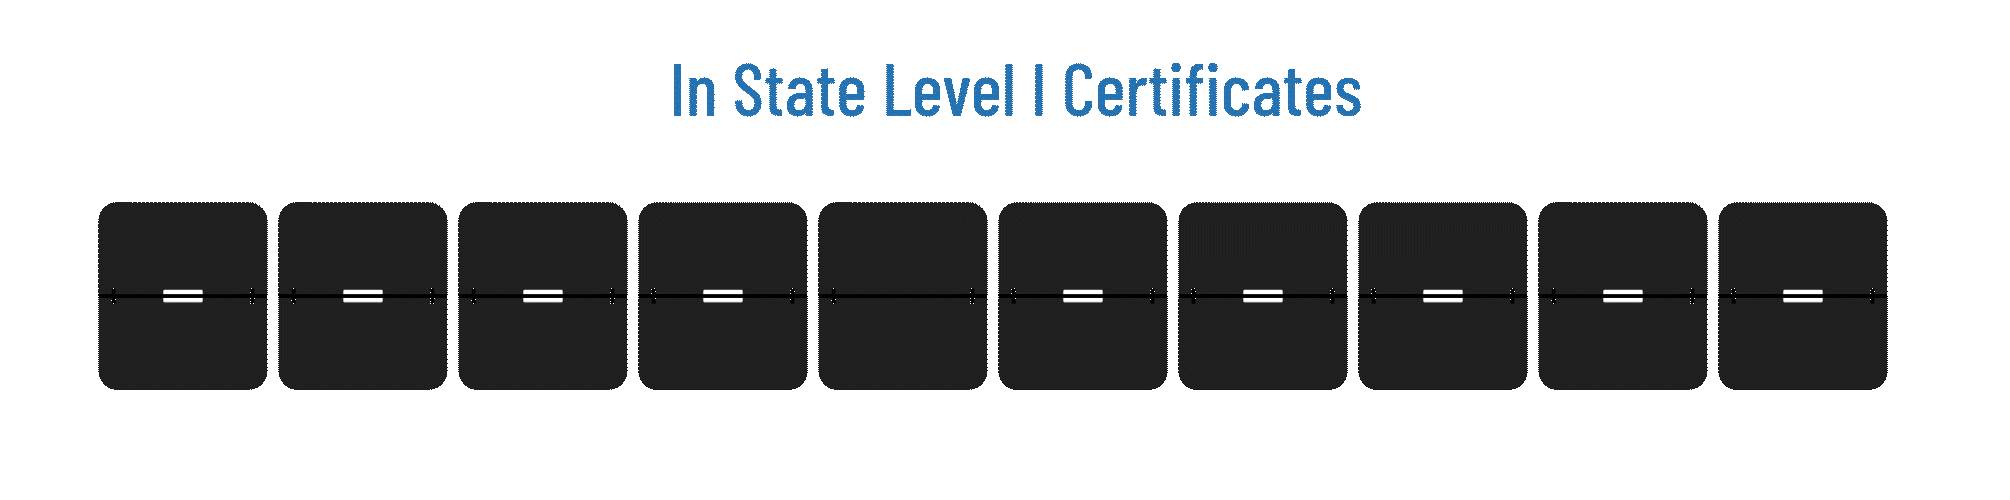 In State Level I Certificates - 1-2 Weeks